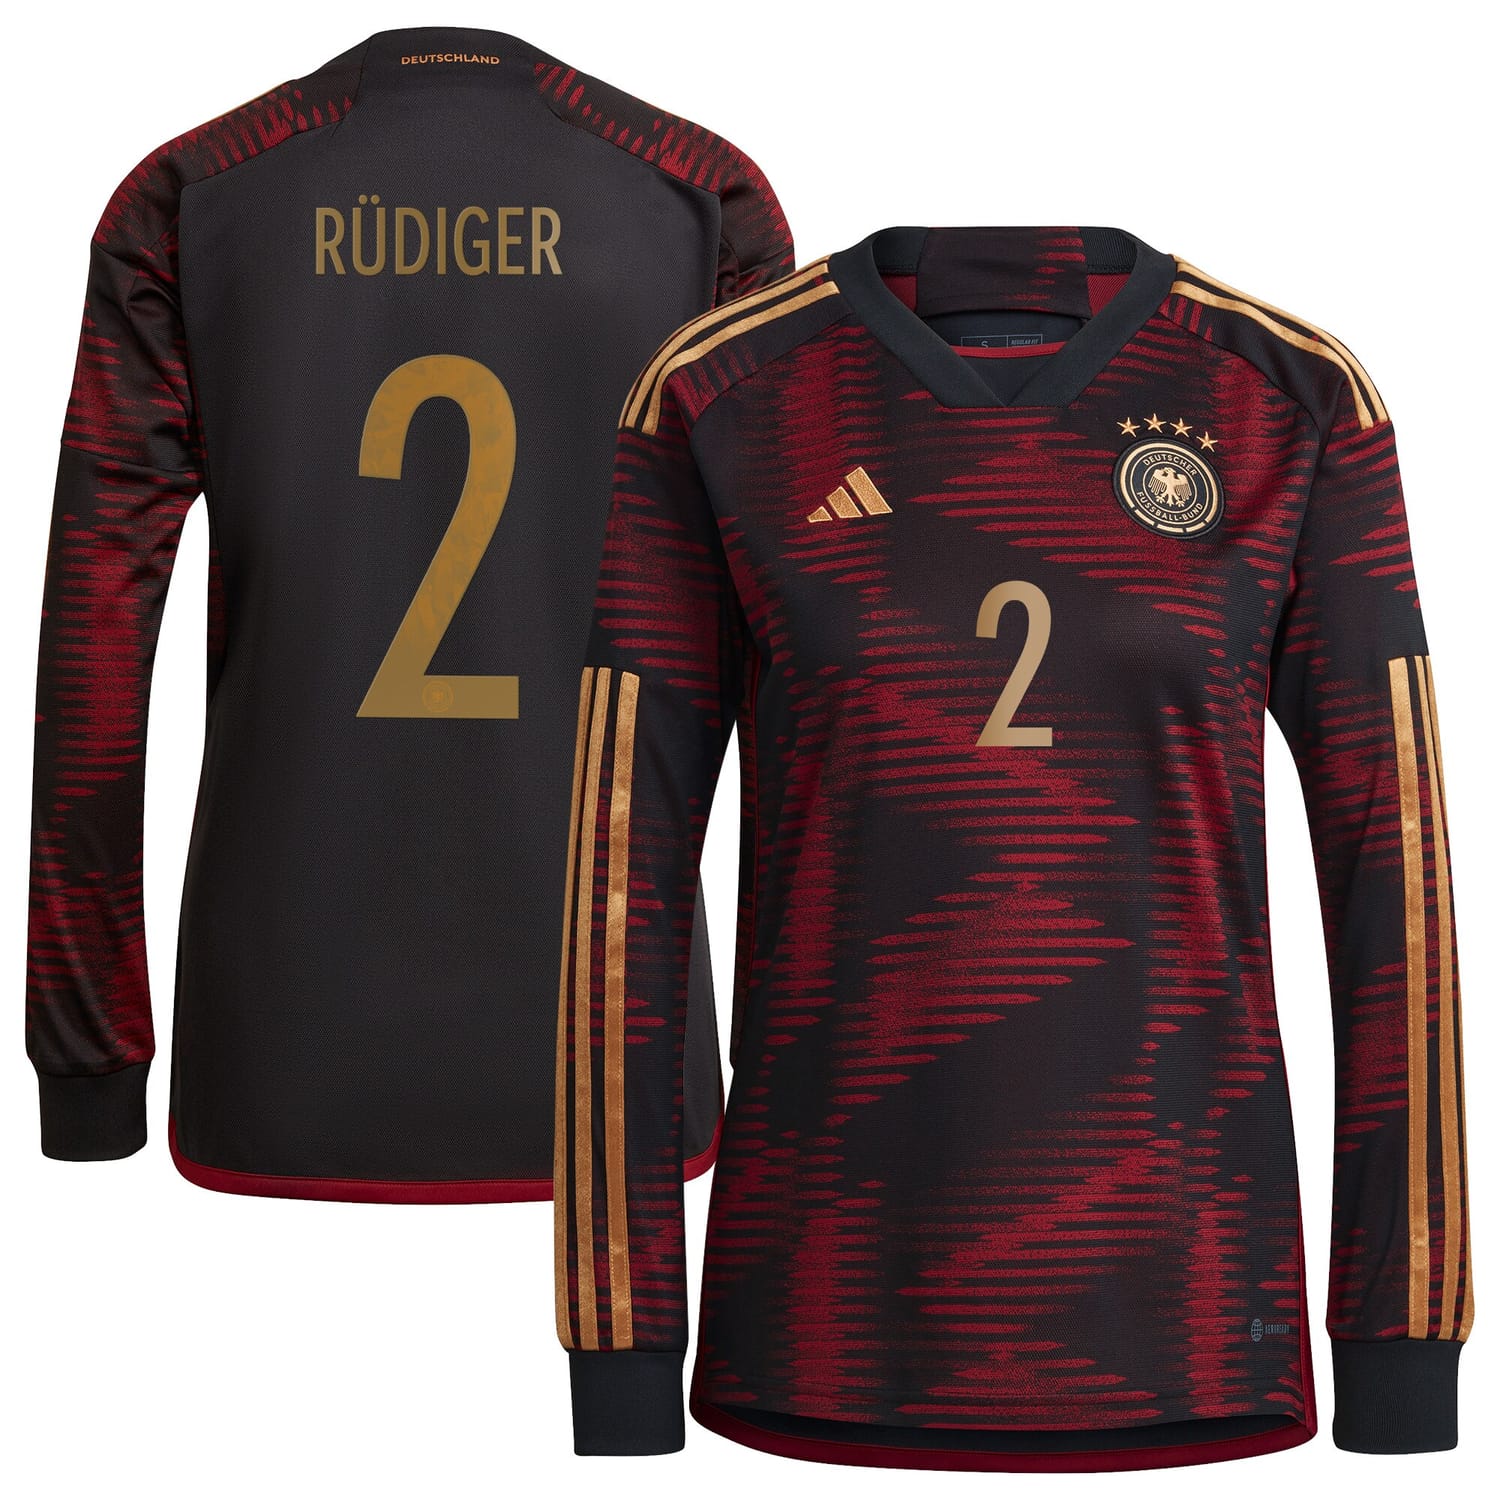 Germany National Team Away Jersey Shirt Long Sleeve player Antonio Rüdiger 2 printing for Women